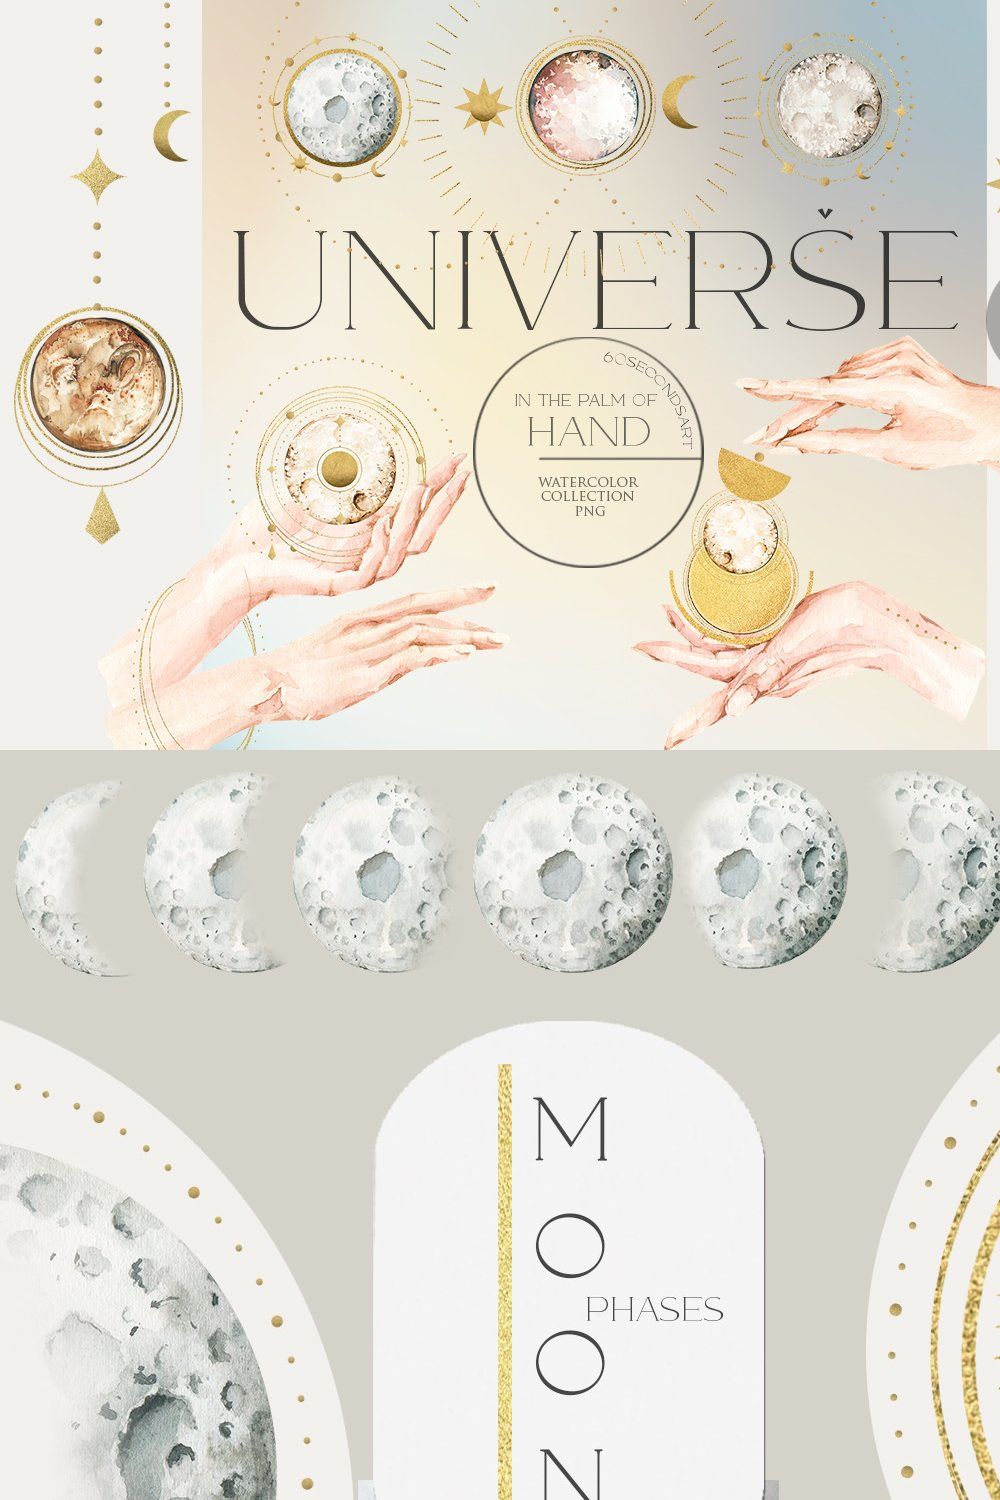 Сelestial mystery cosmos hands pinterest preview image.